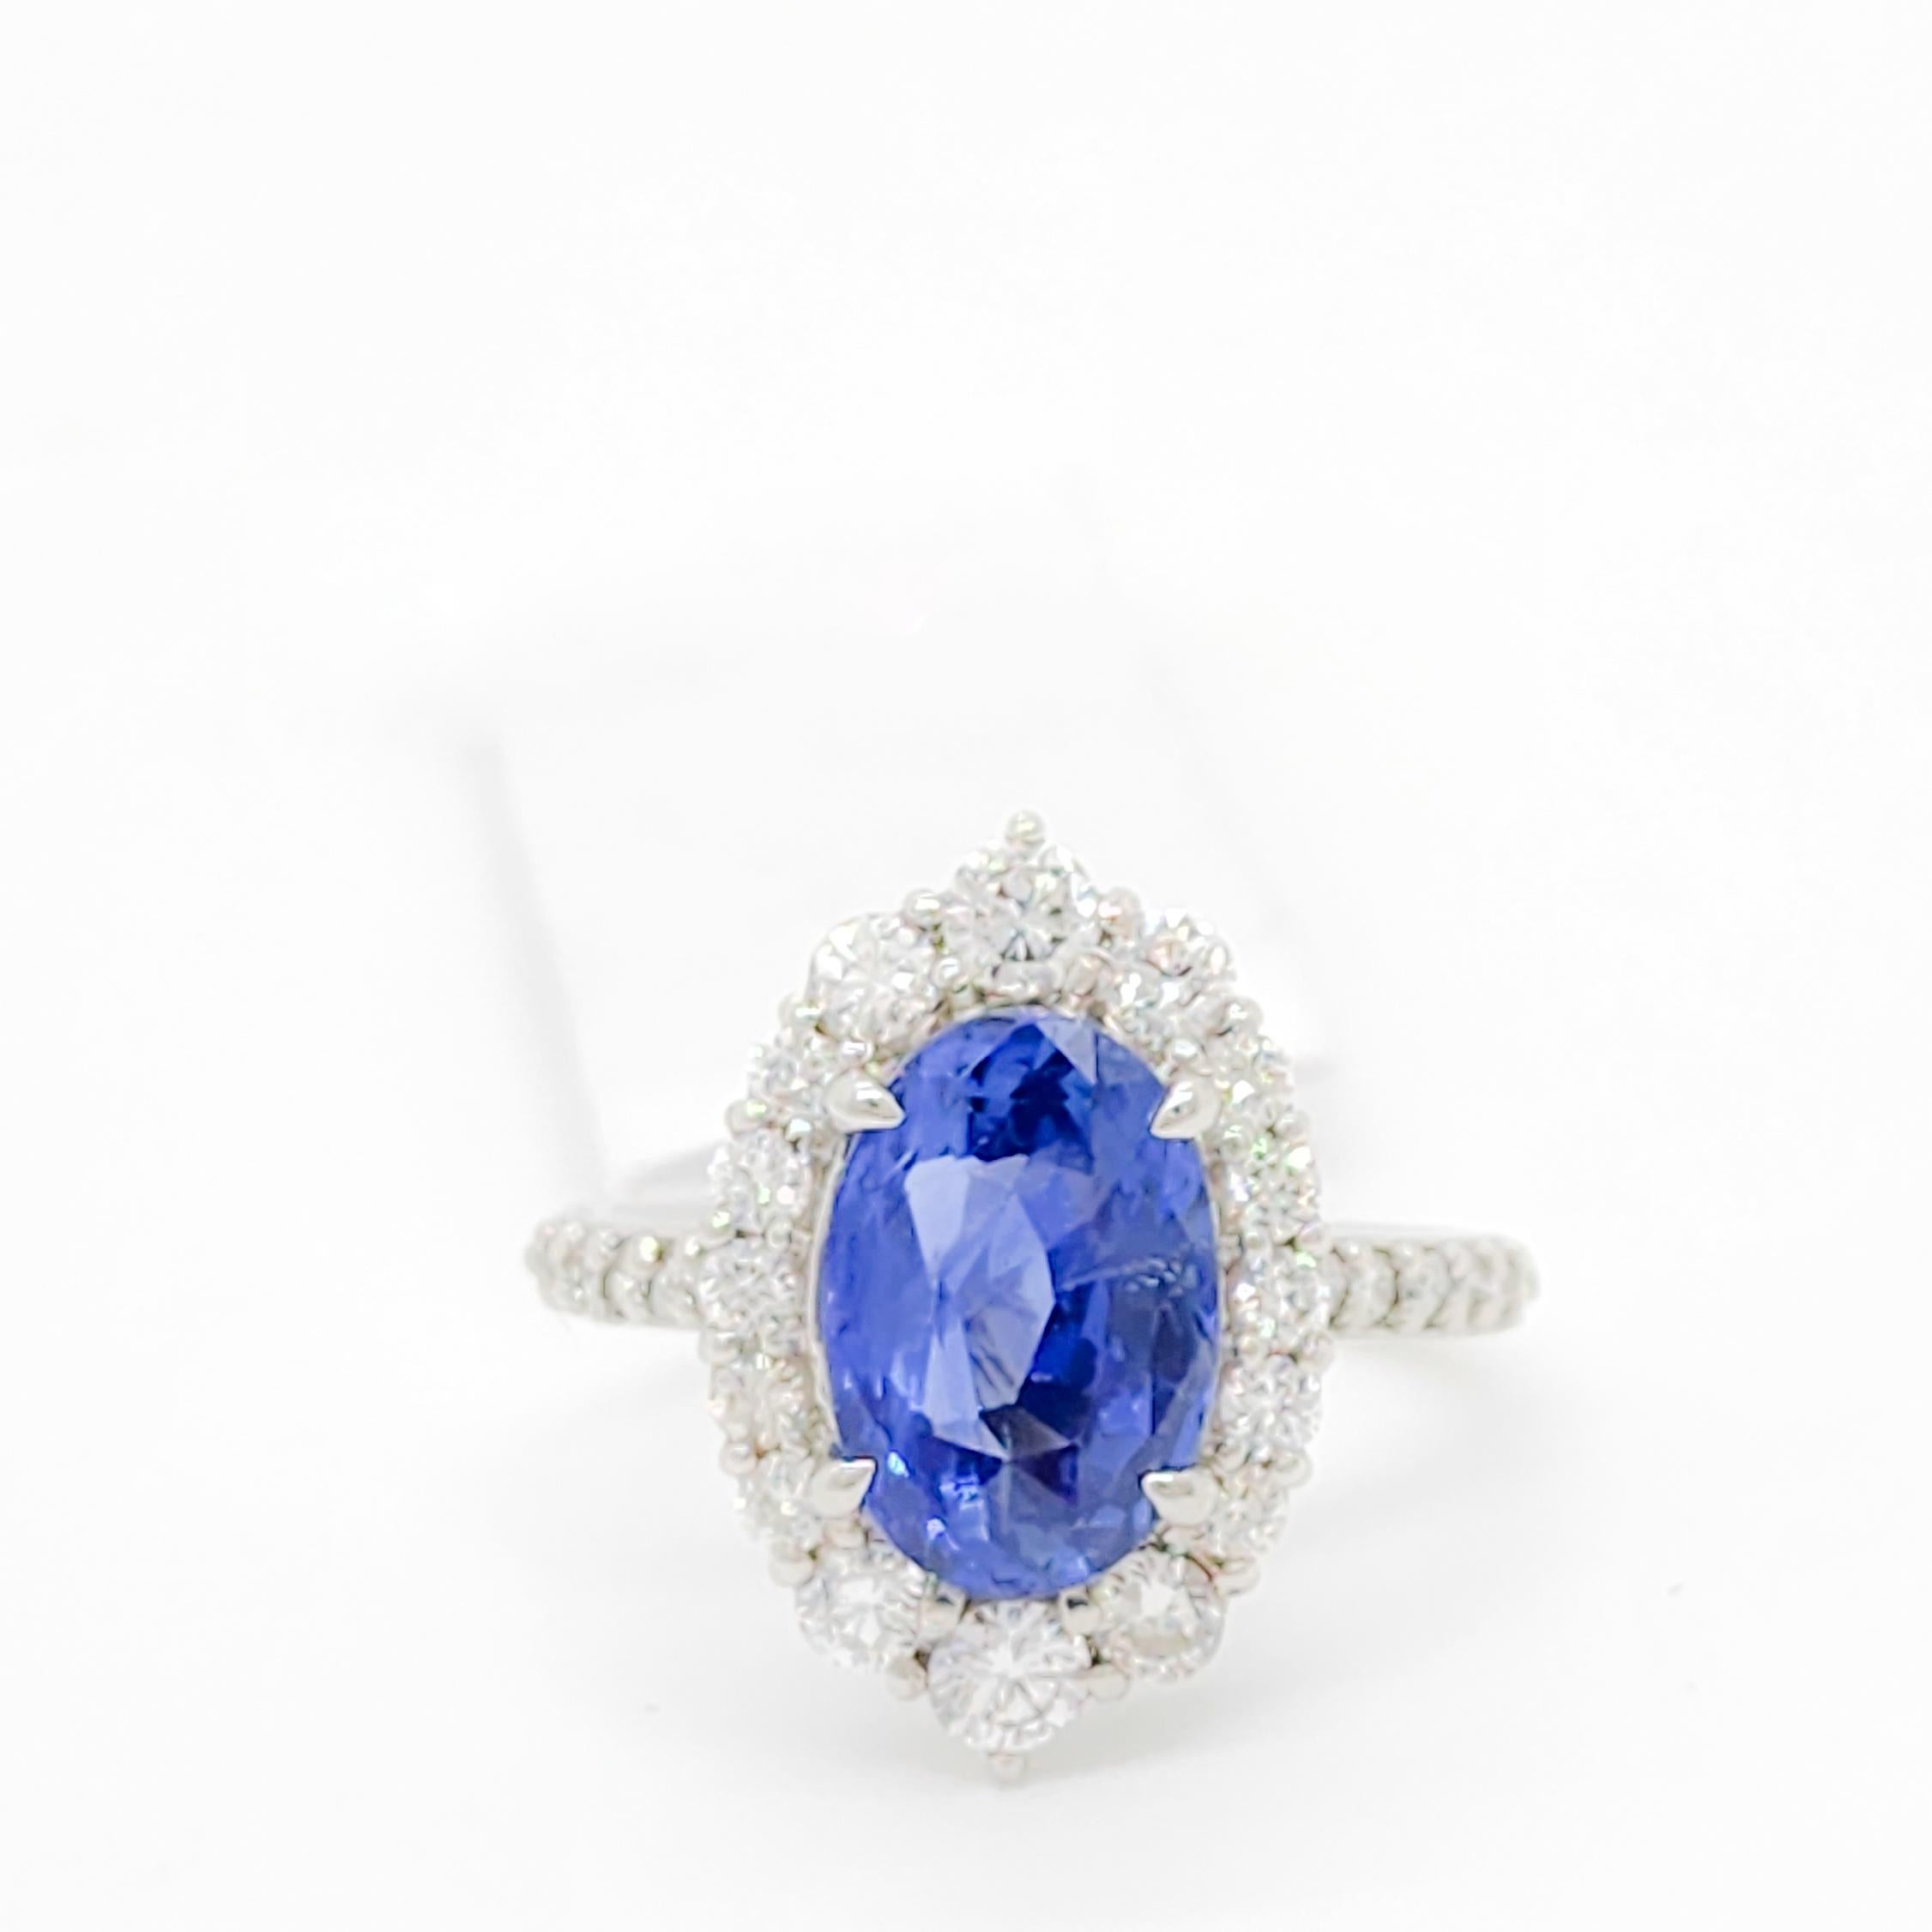 Gorgeous 3.88 ct. blue sapphire oval with 0.80 ct. good quality white diamond rounds.  Handmade in platinum.  Ring size 5.75.